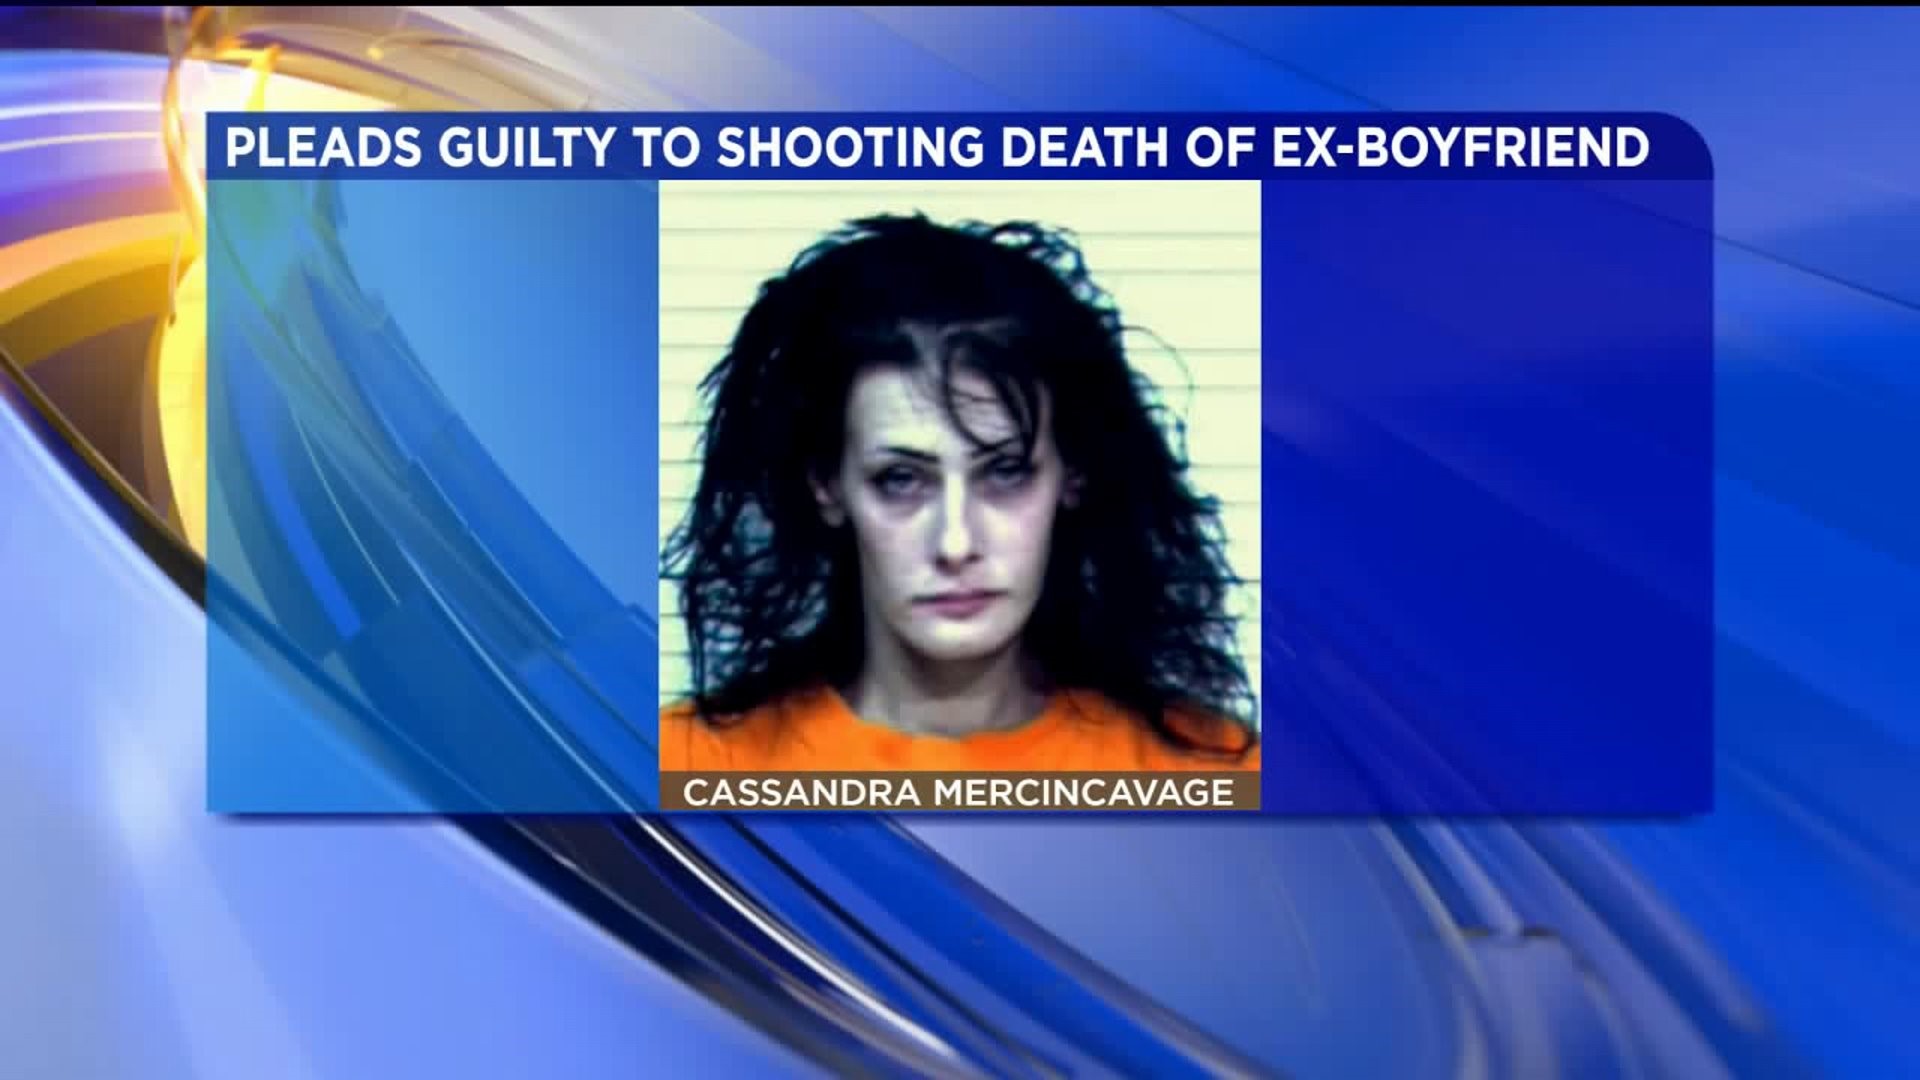 Woman Admits to Shooting Death of Boyfriend in Susquehanna County